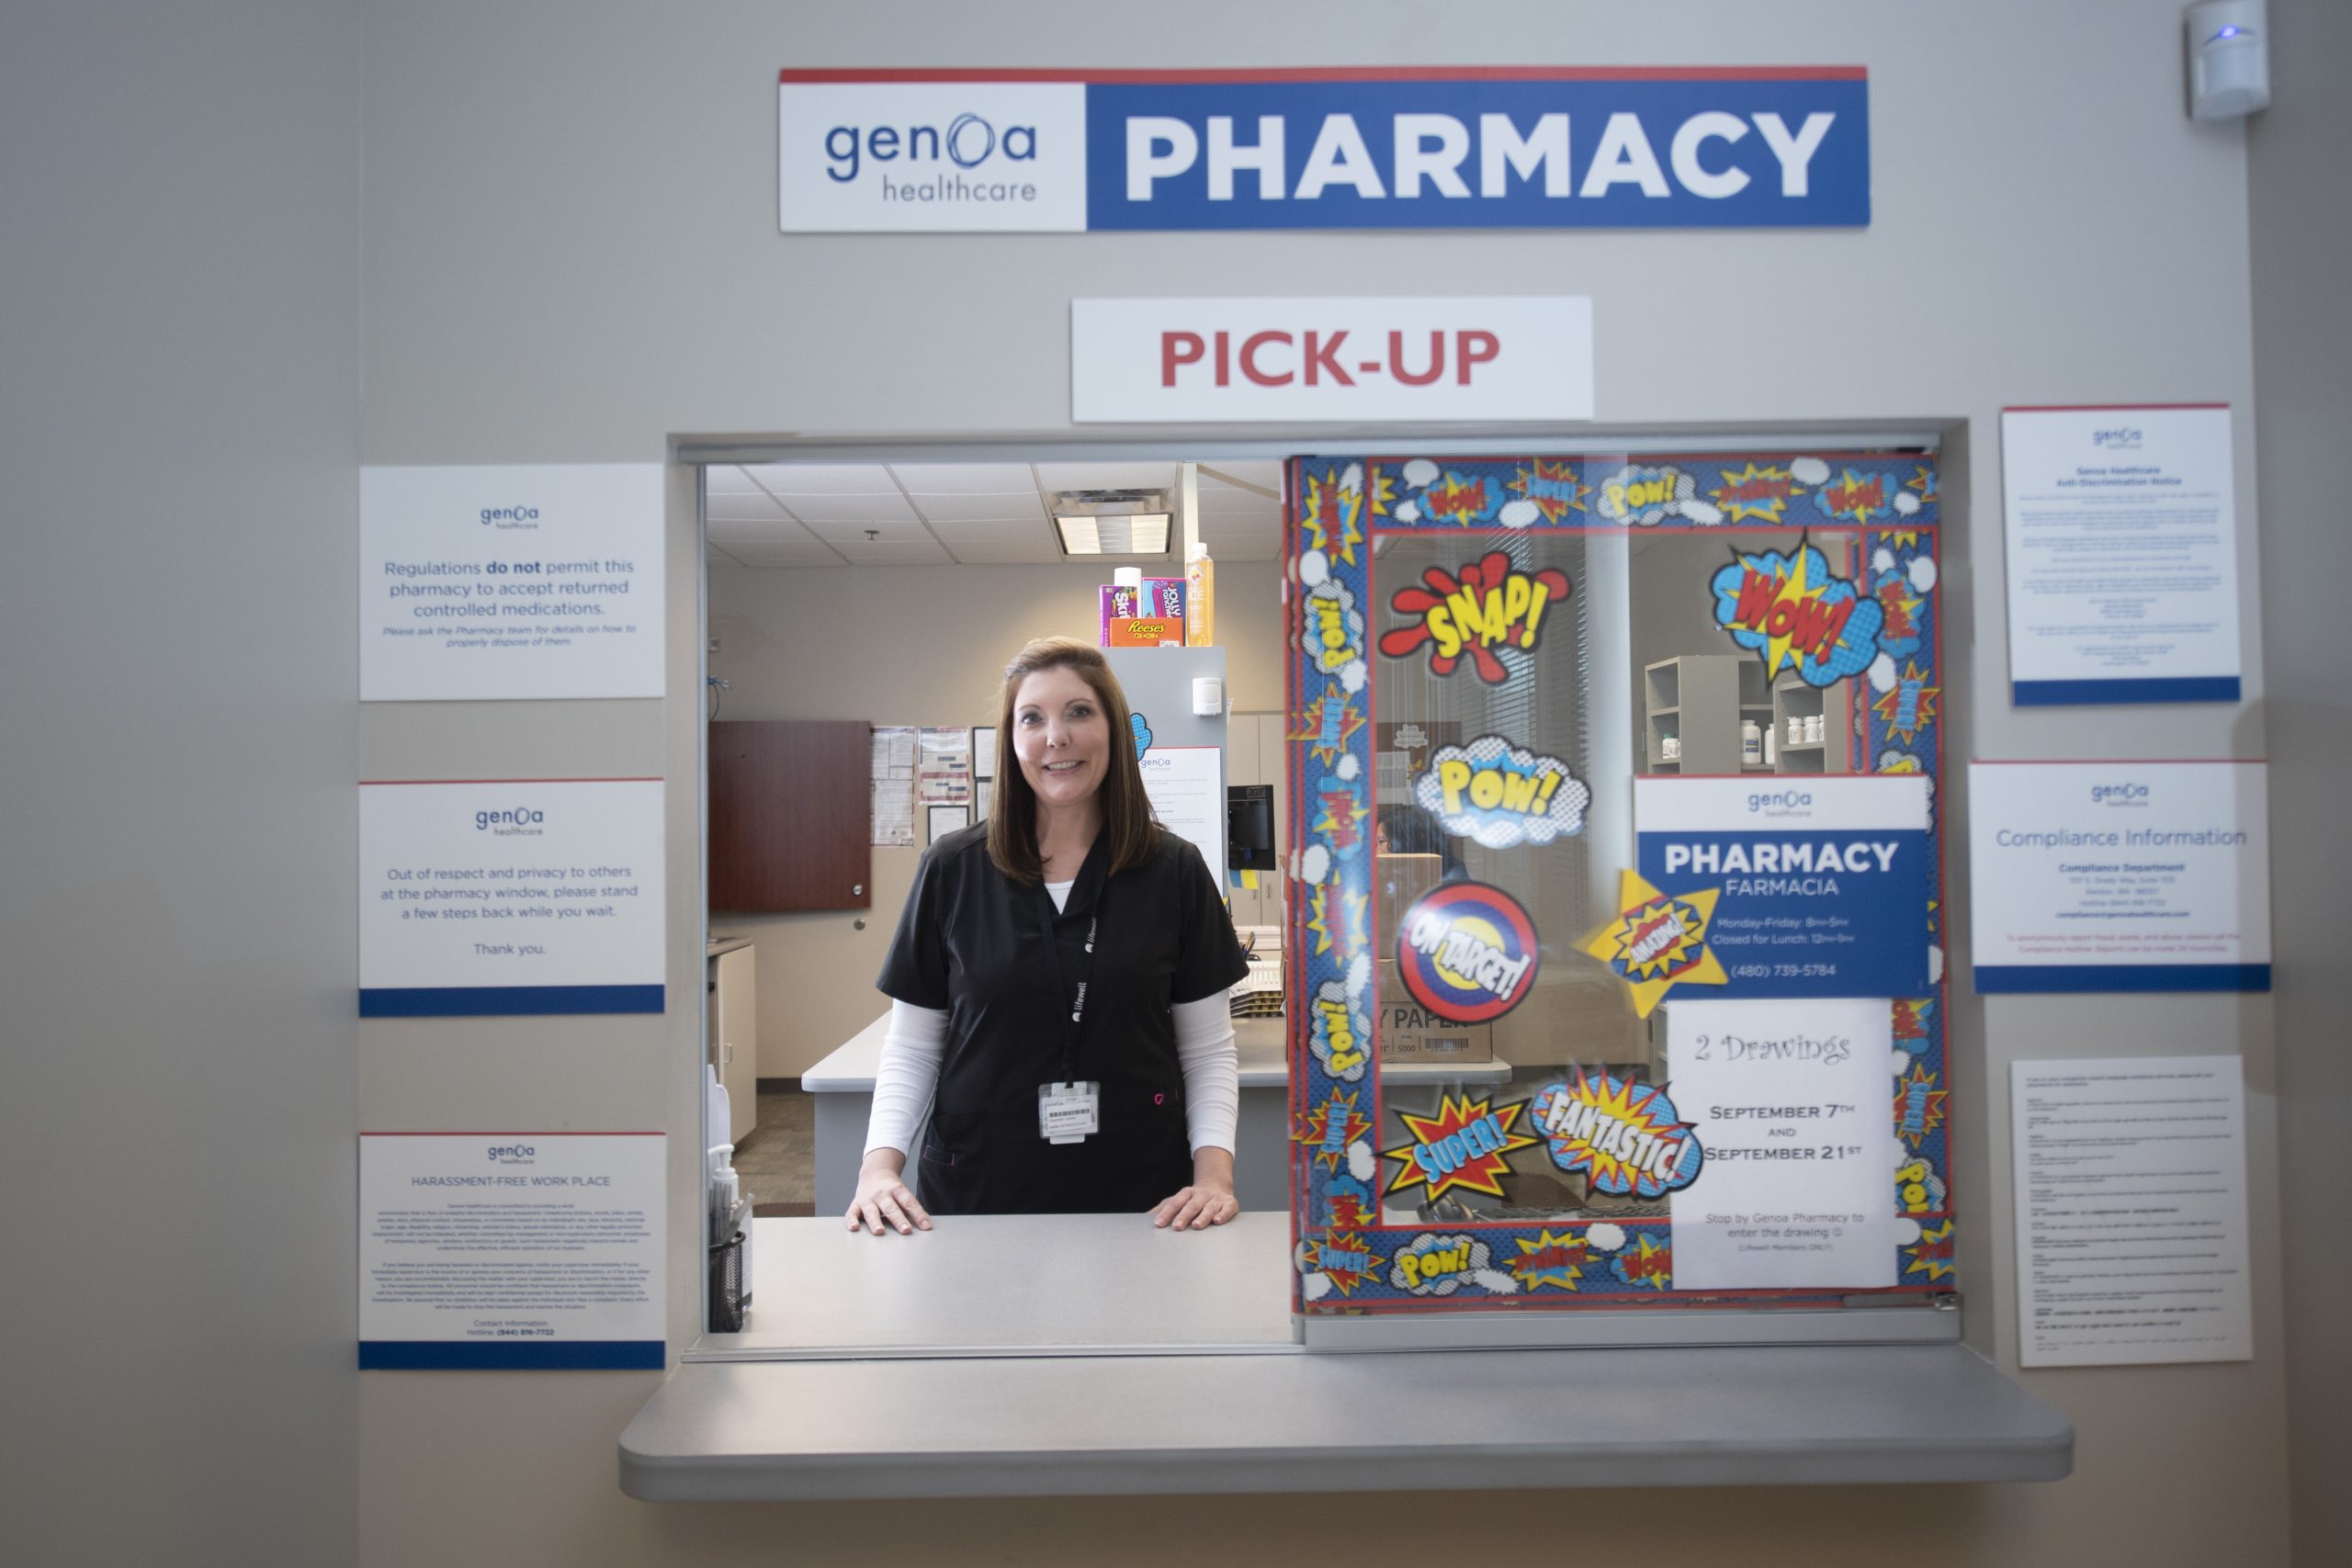 Announcing five new pharmacy openings! - Genoa Healthcare